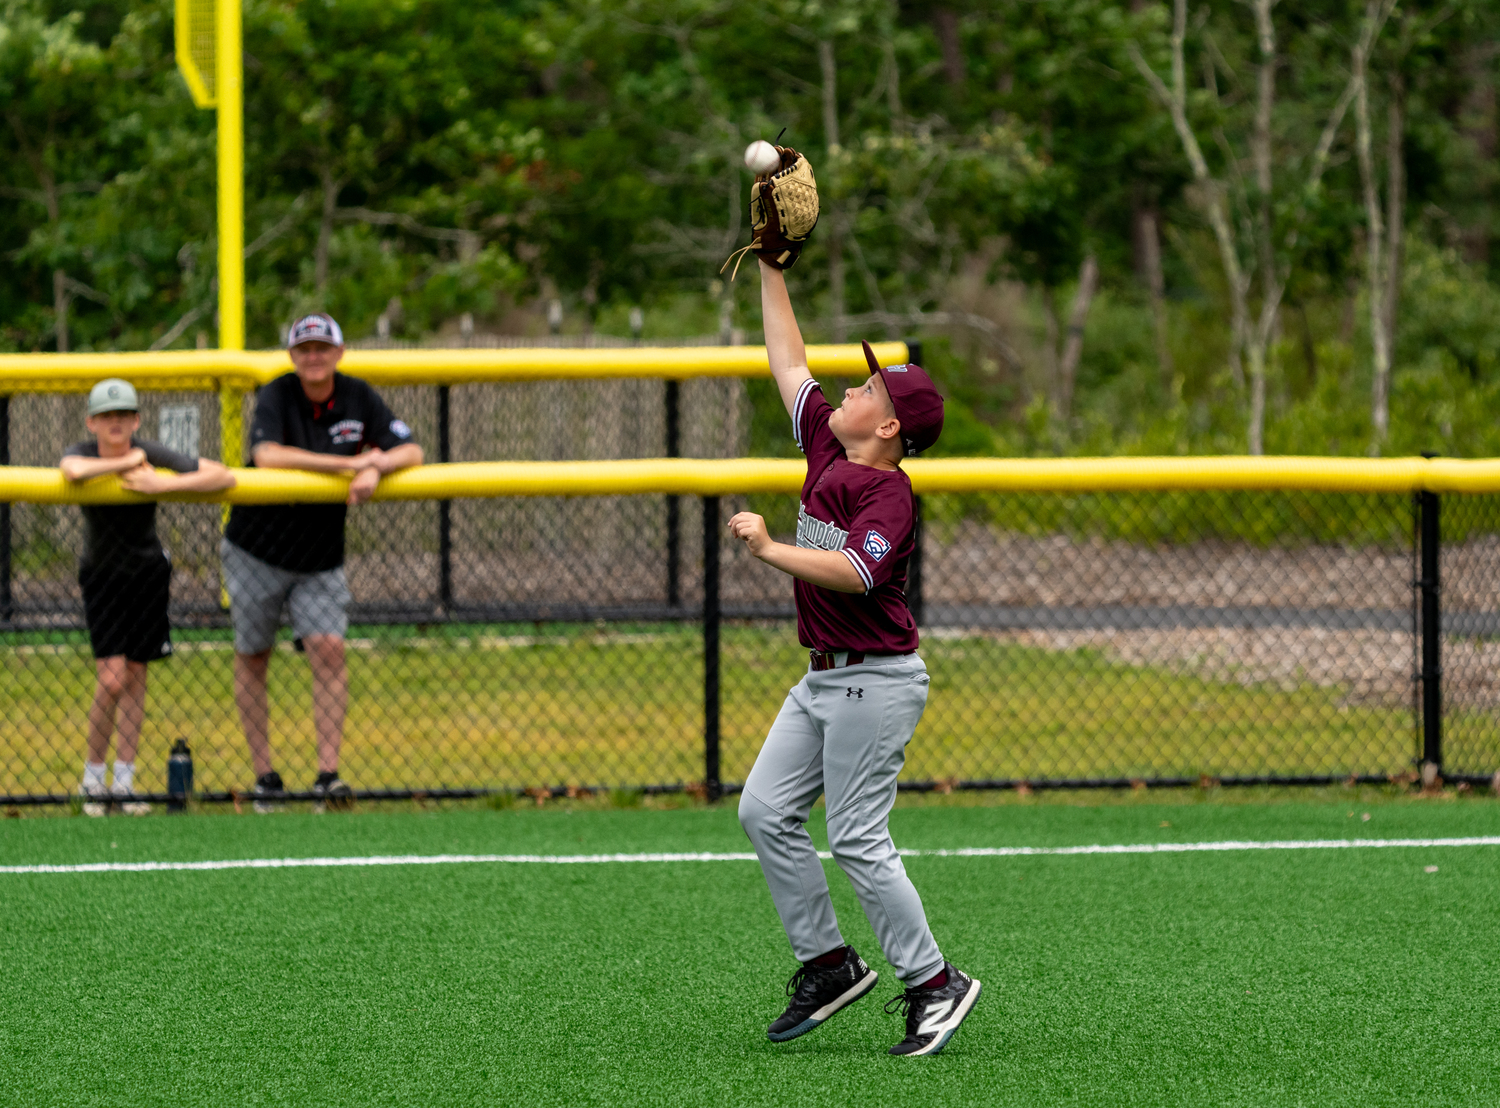 William Babinski secures the victory with a game-ending catch.  RON ESPOSITO